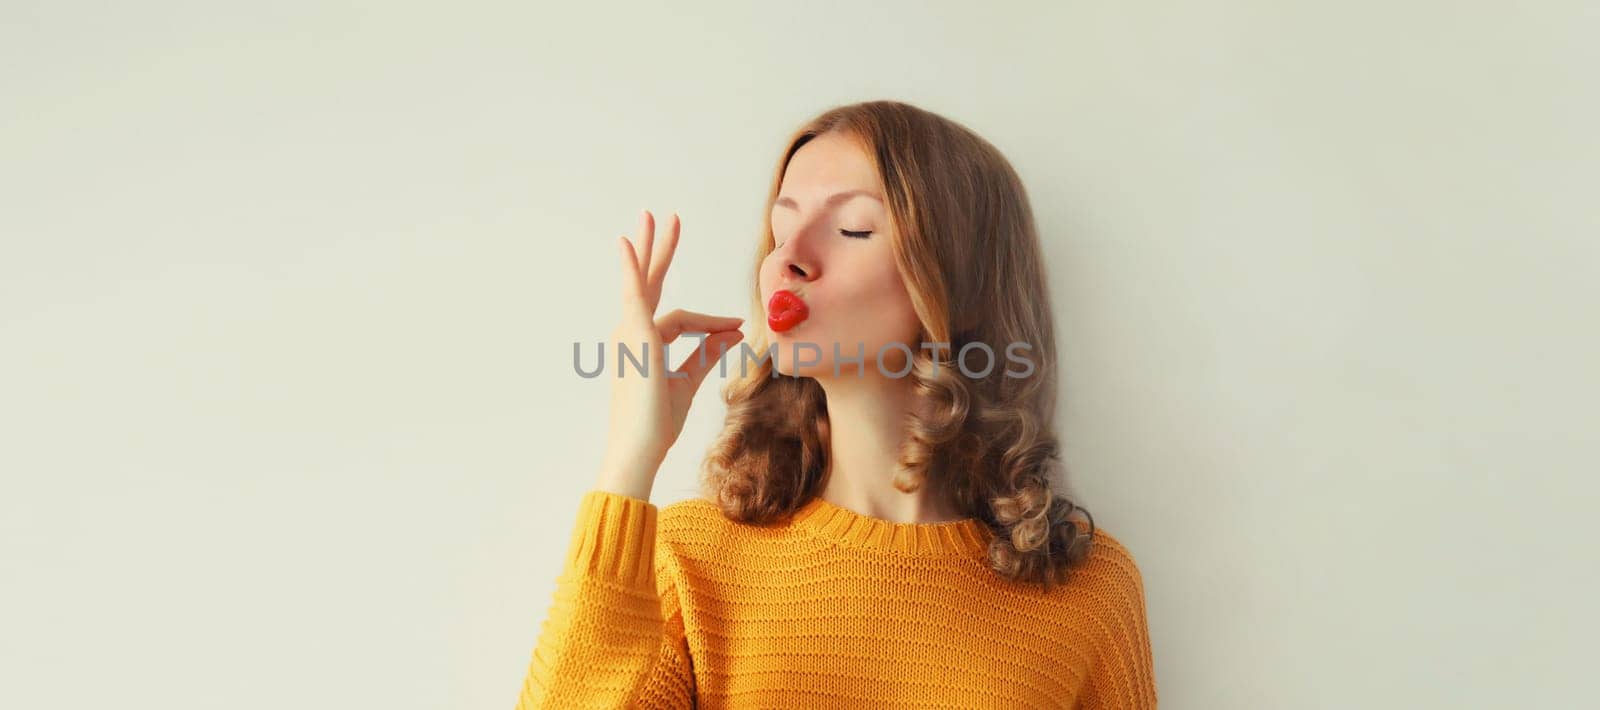 Happy young woman enjoying perfect flavor, shows gesture of delicious taste of food by Rohappy